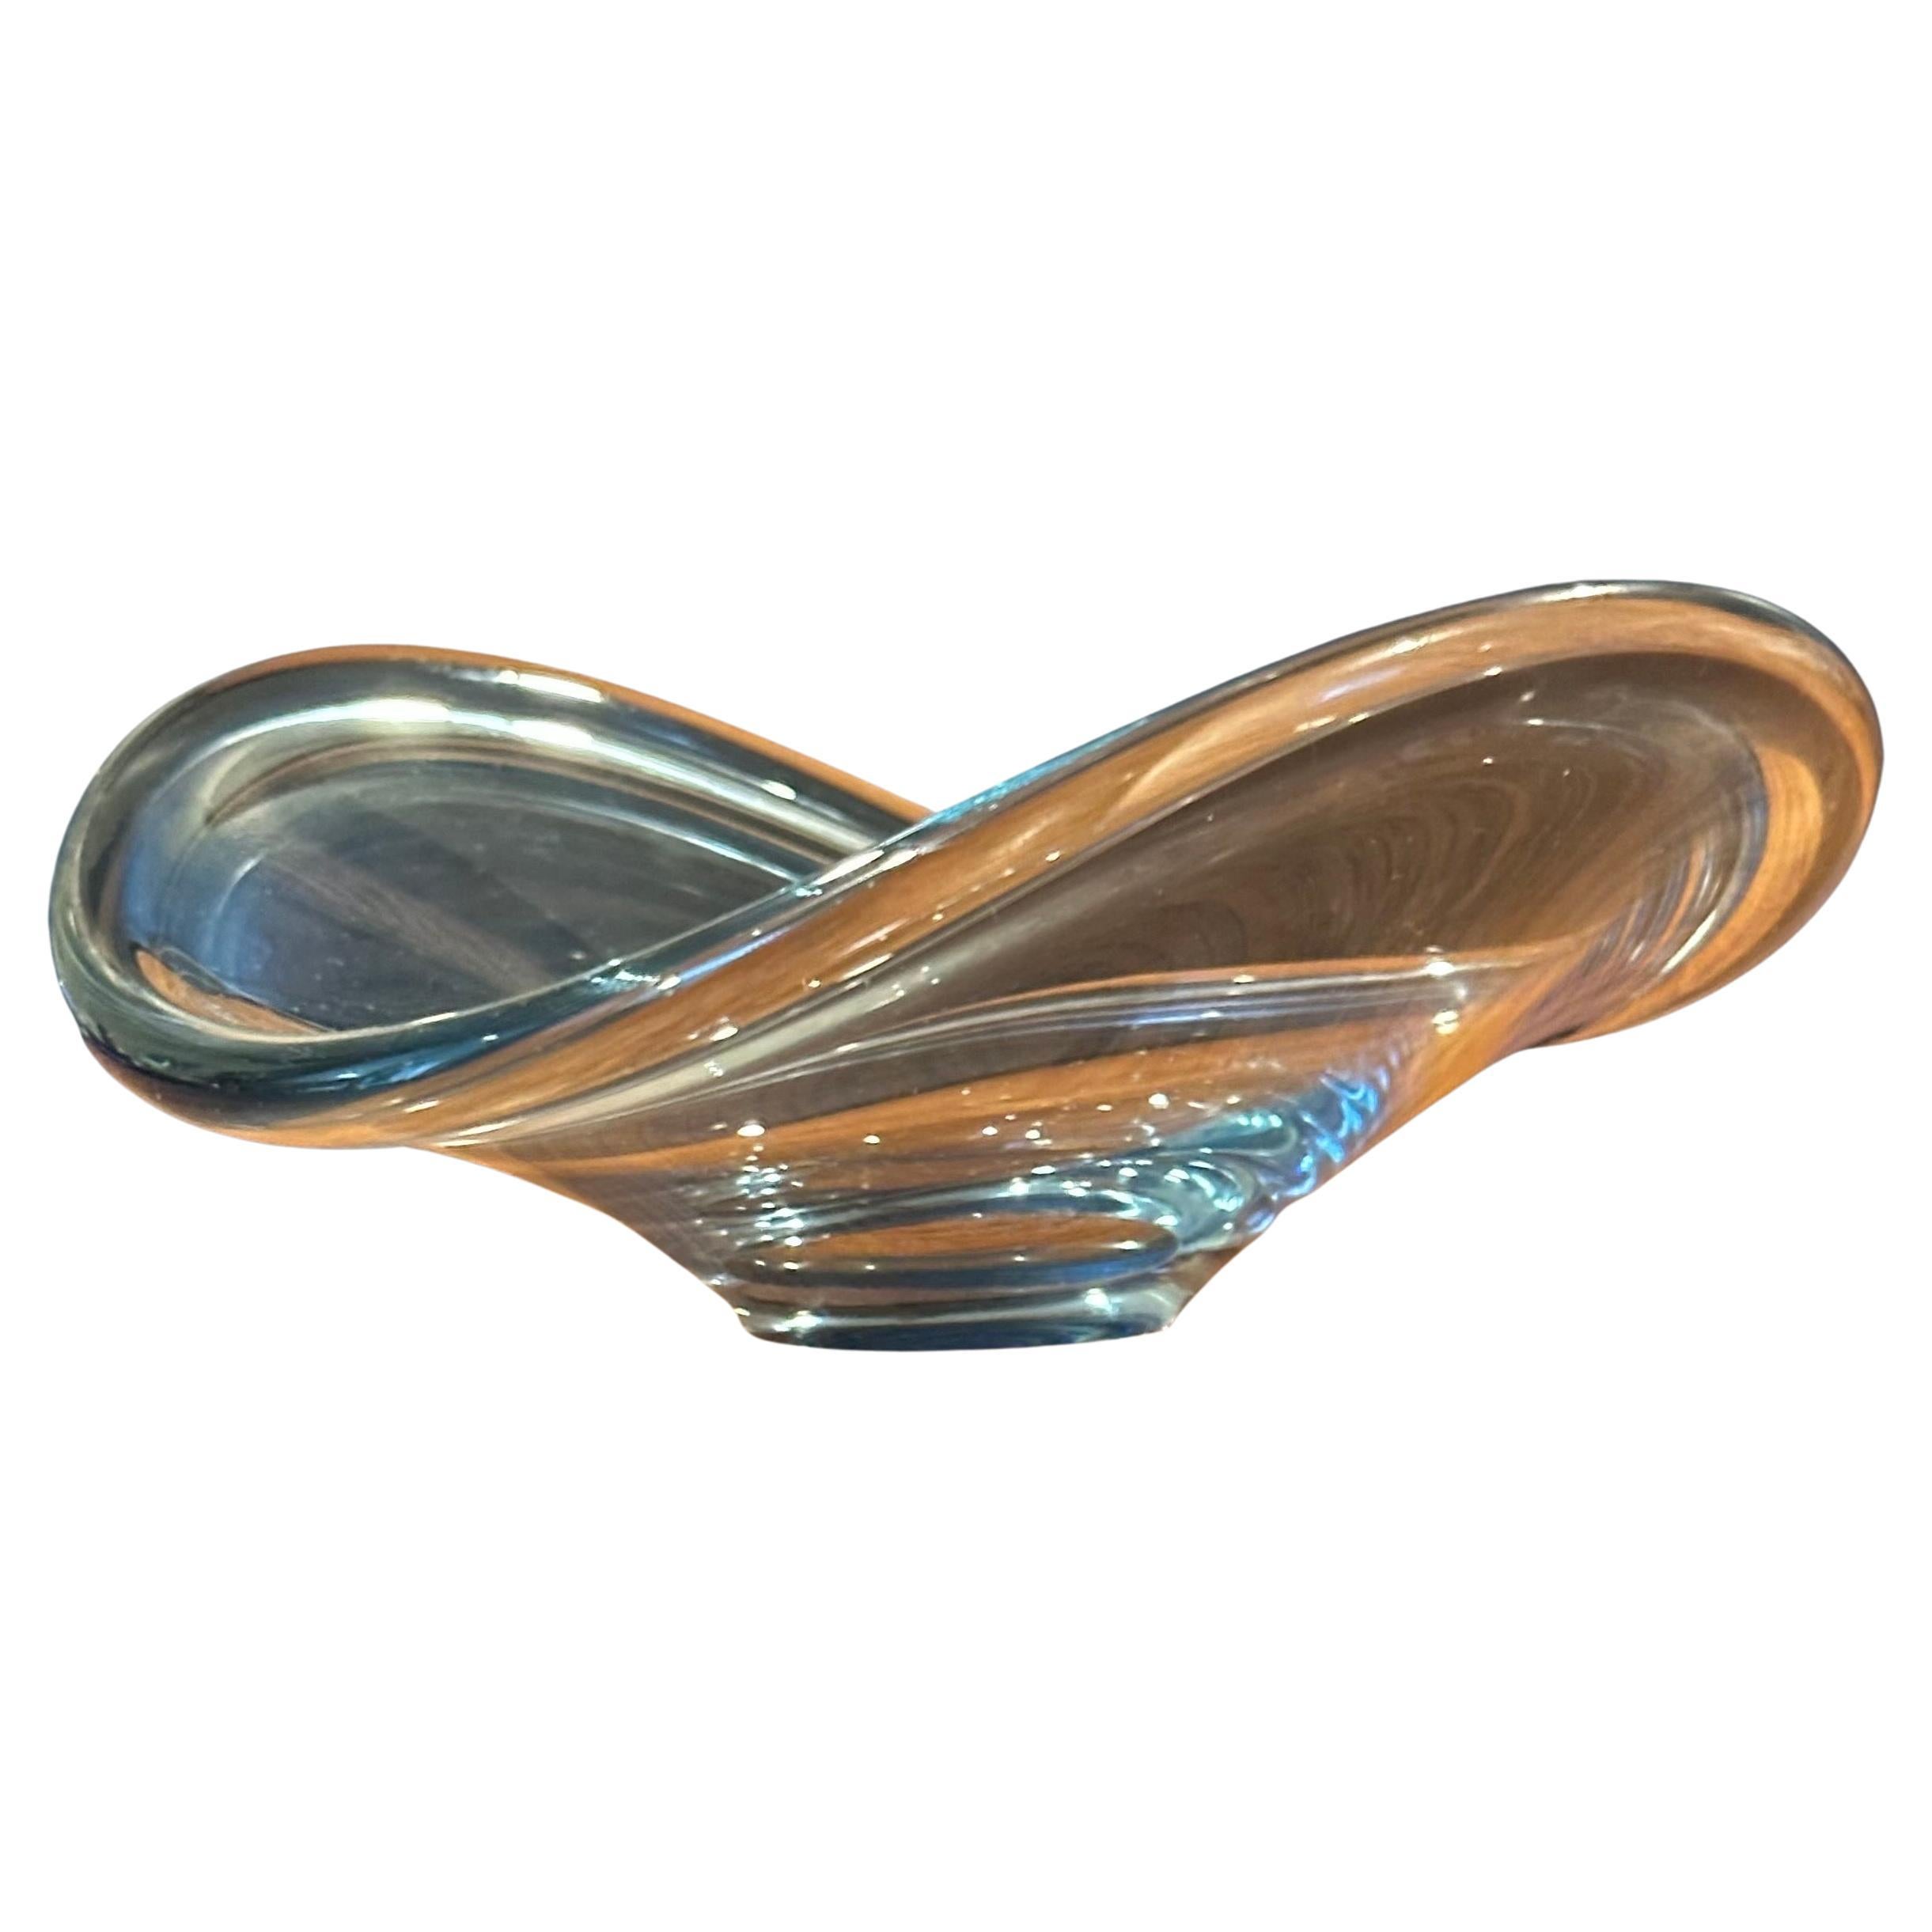 Biomorphic Hand Blown Clear Glass Bowl "Selandia" by Per Lutken for Holmegaard For Sale